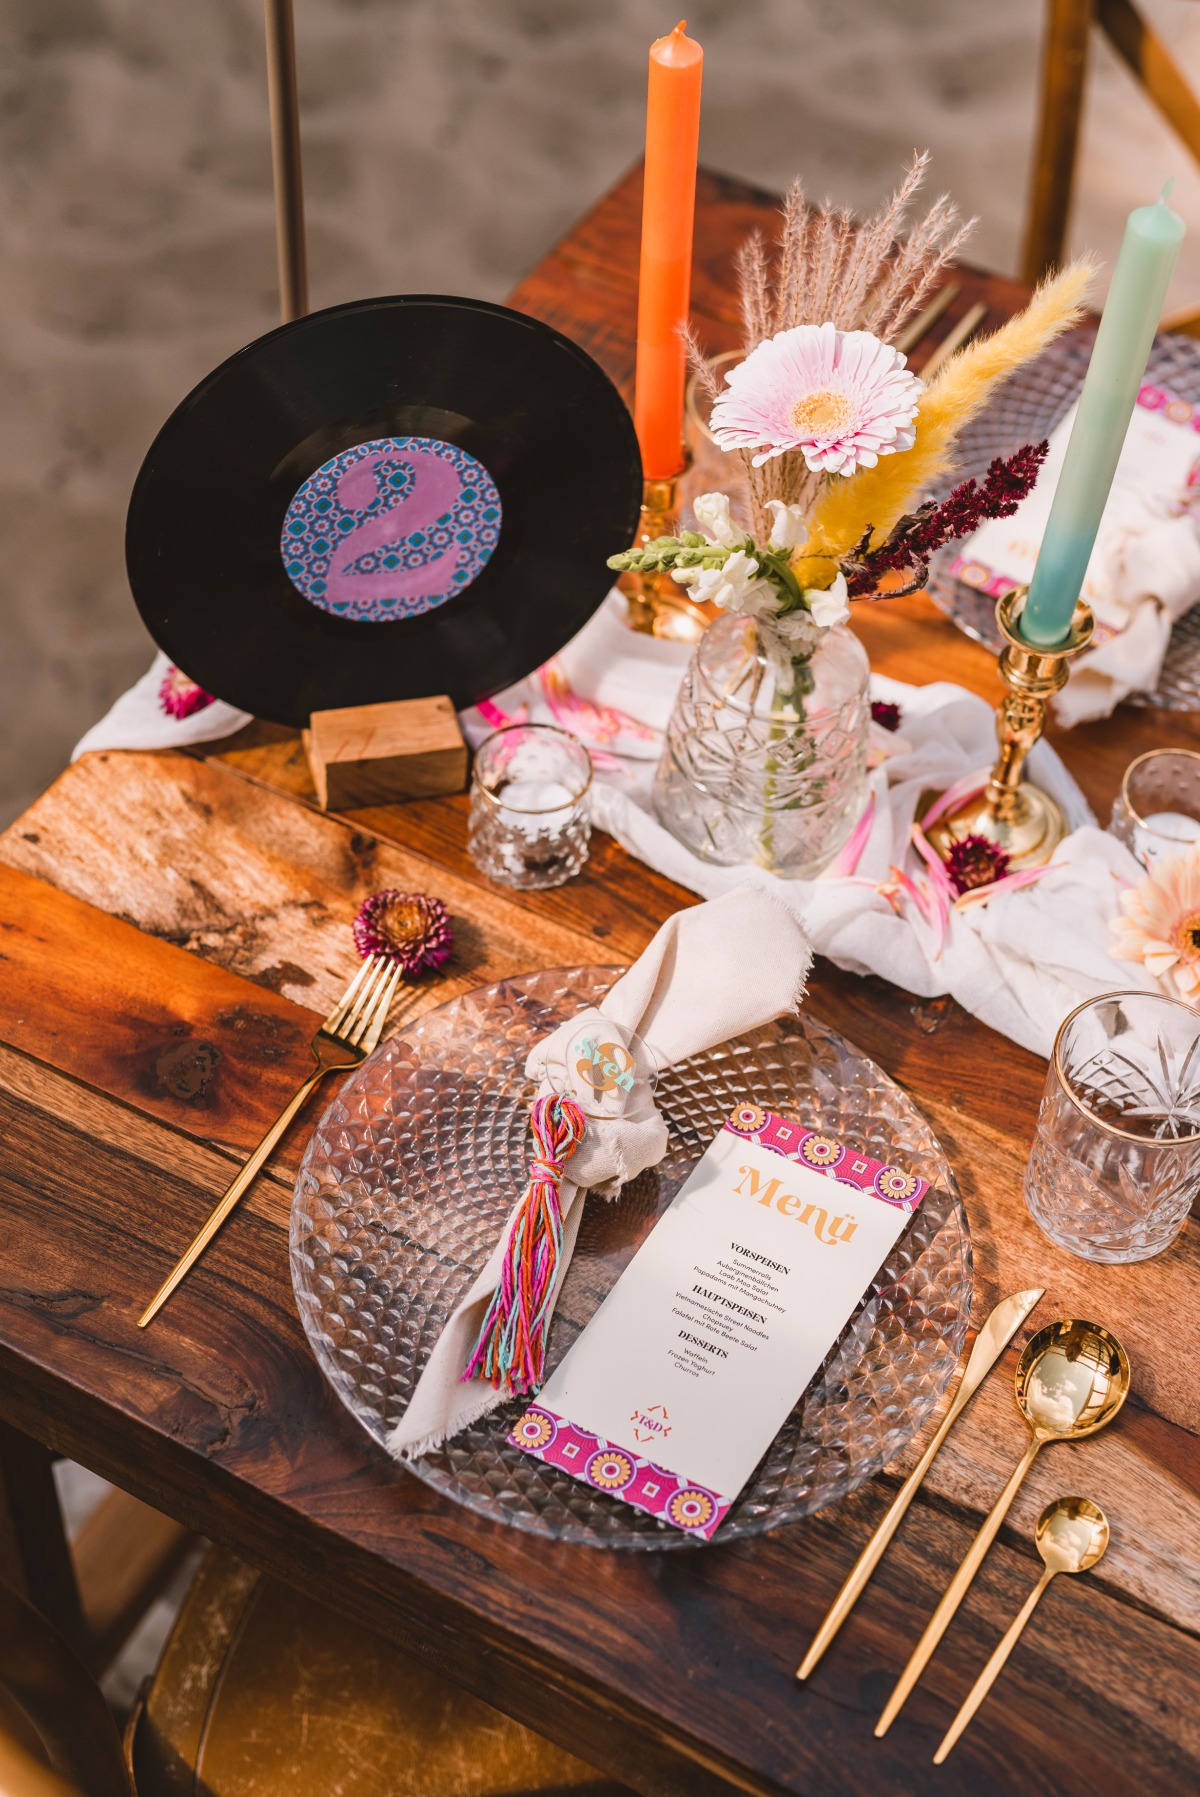 Menu and place setting with vinyl record table number and centerpiece objects